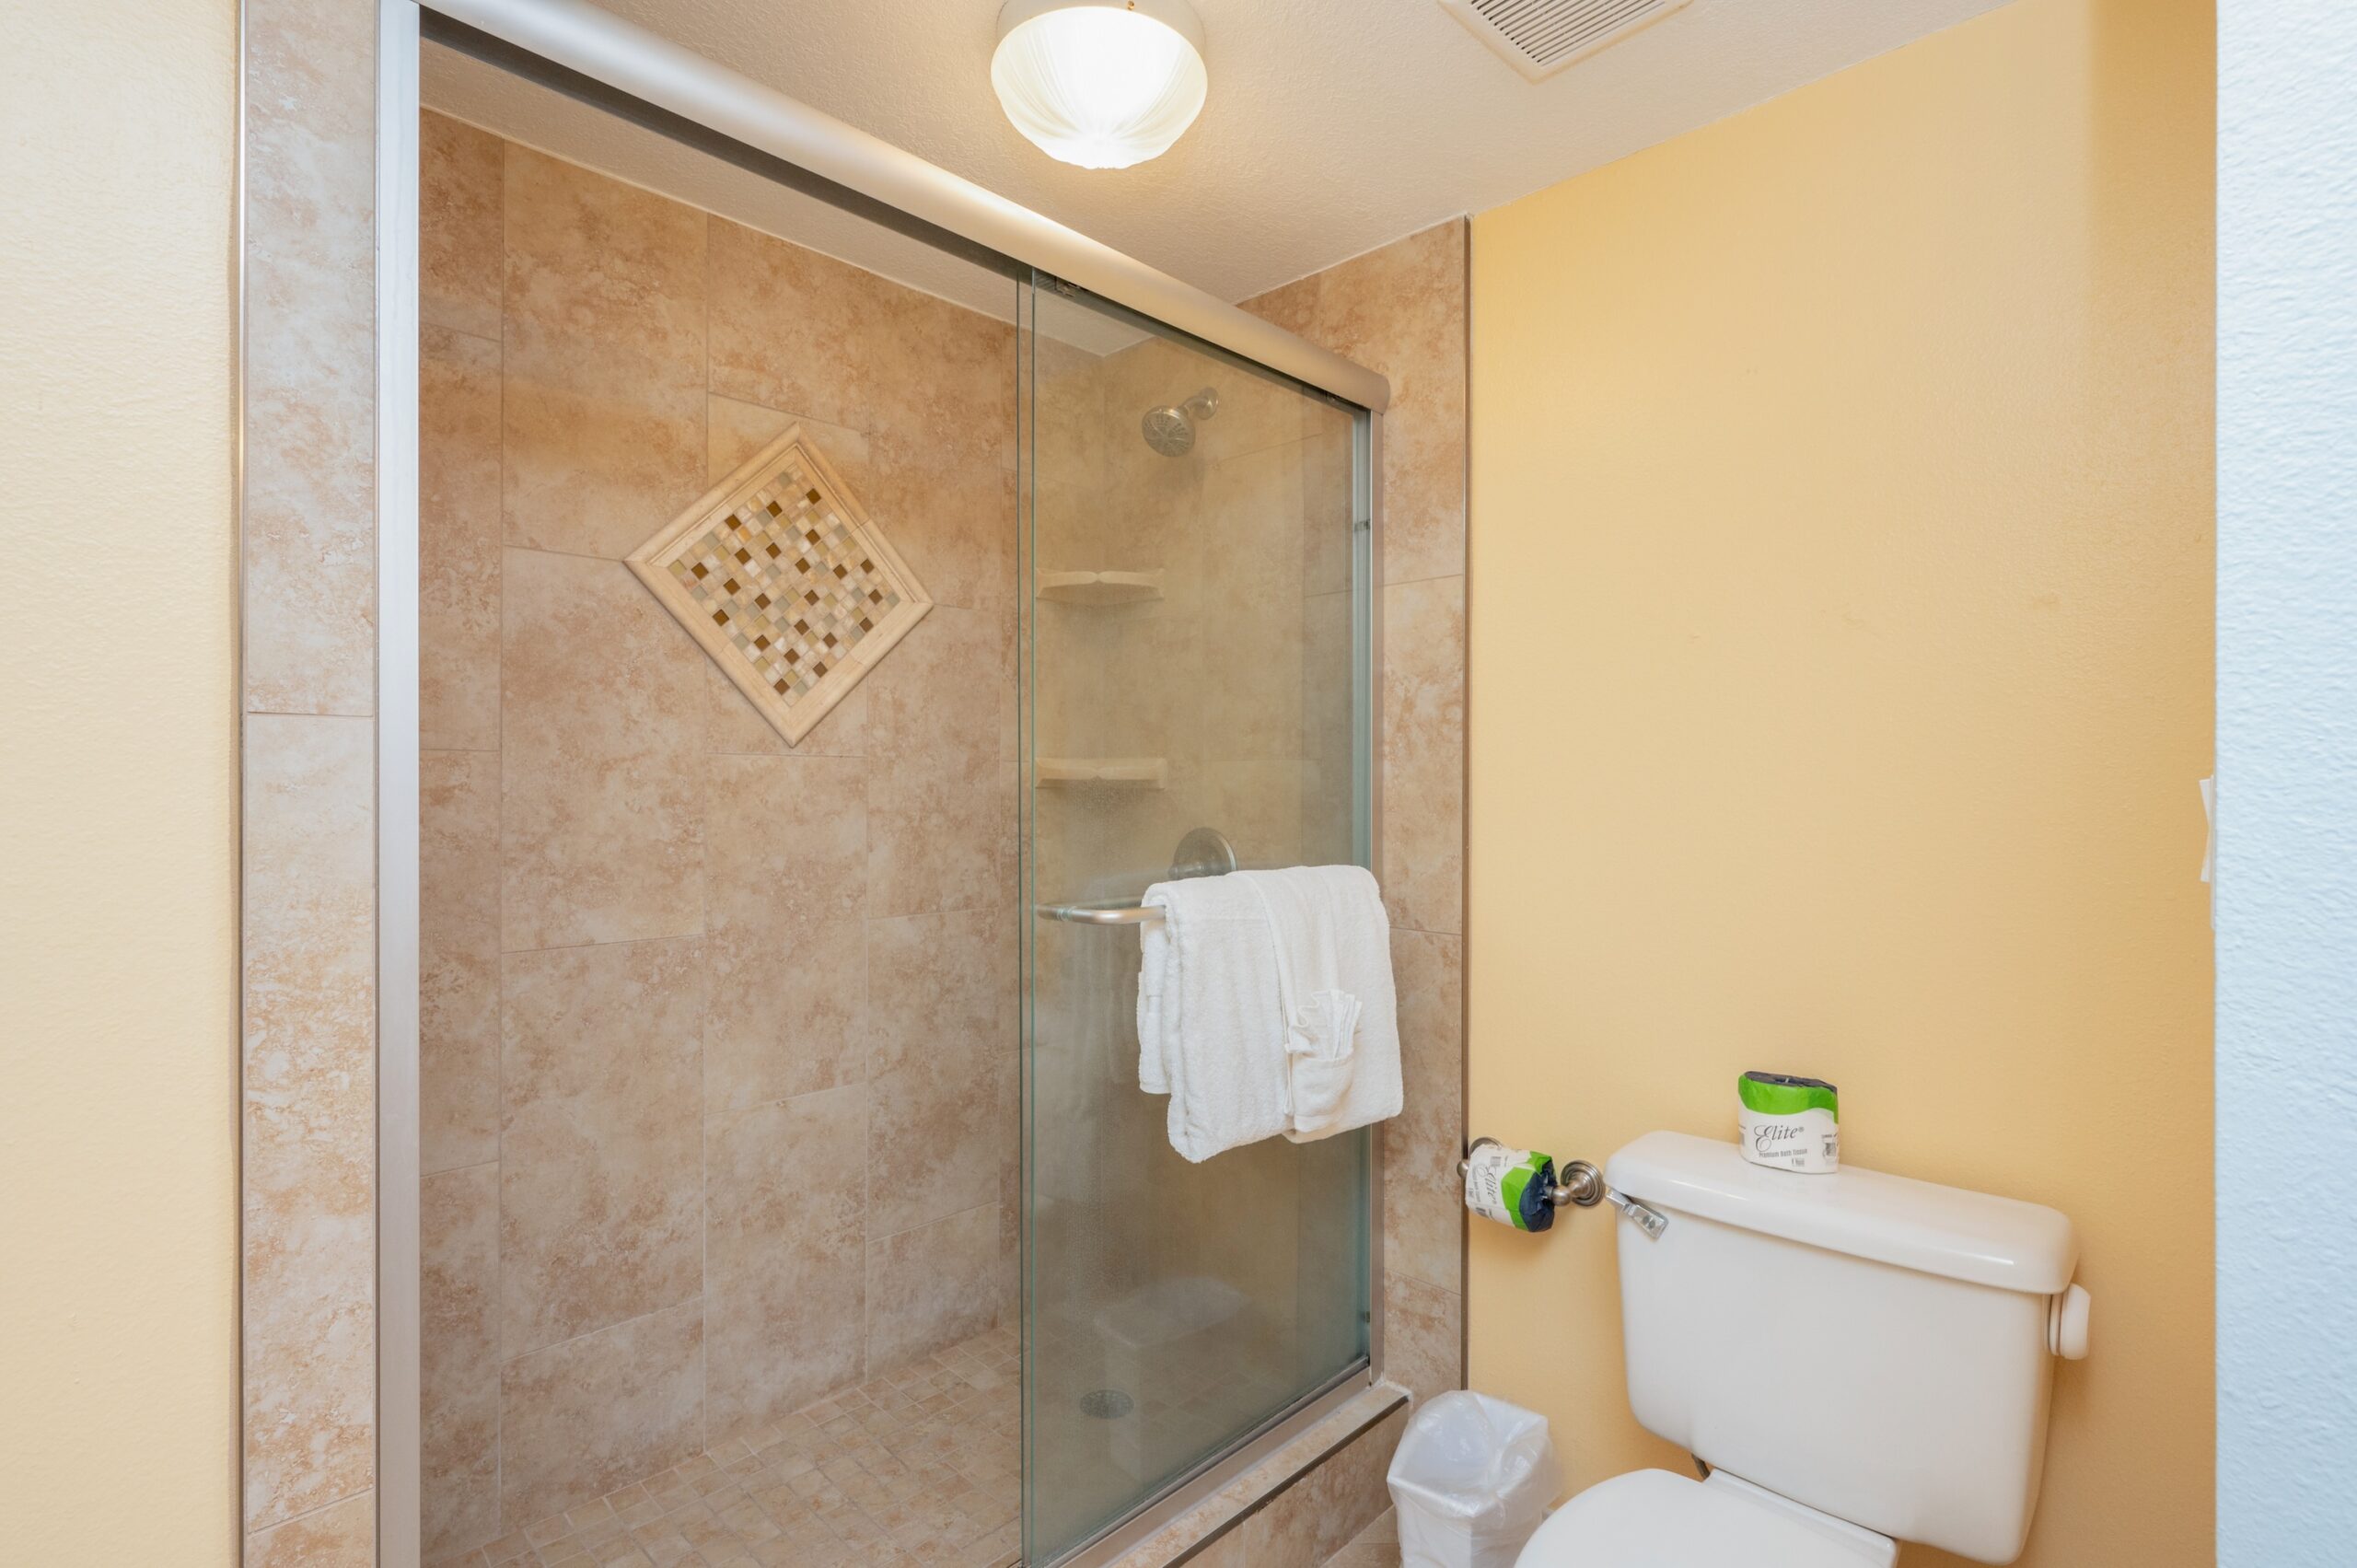 Tile shower with large glass doors in mater bathroom